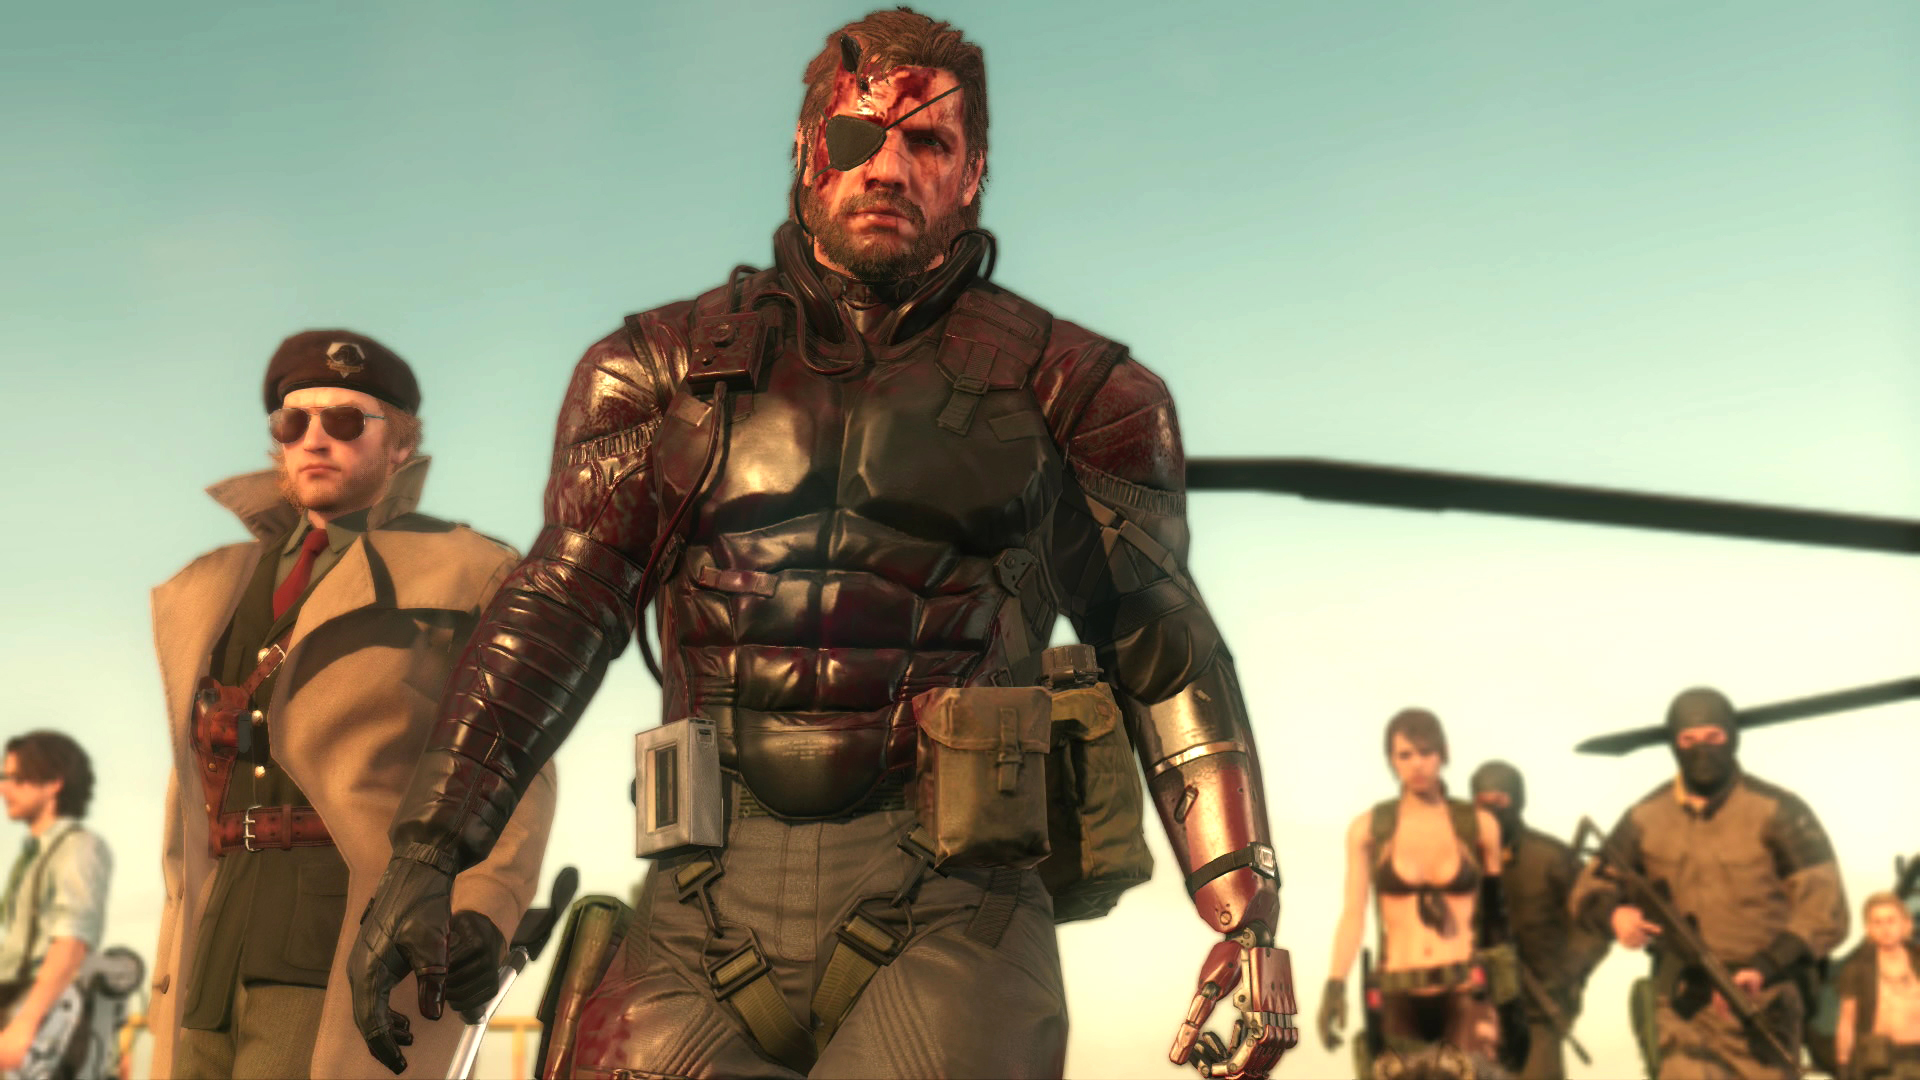 Save 75% on METAL GEAR SOLID V: THE PHANTOM PAIN on Steam